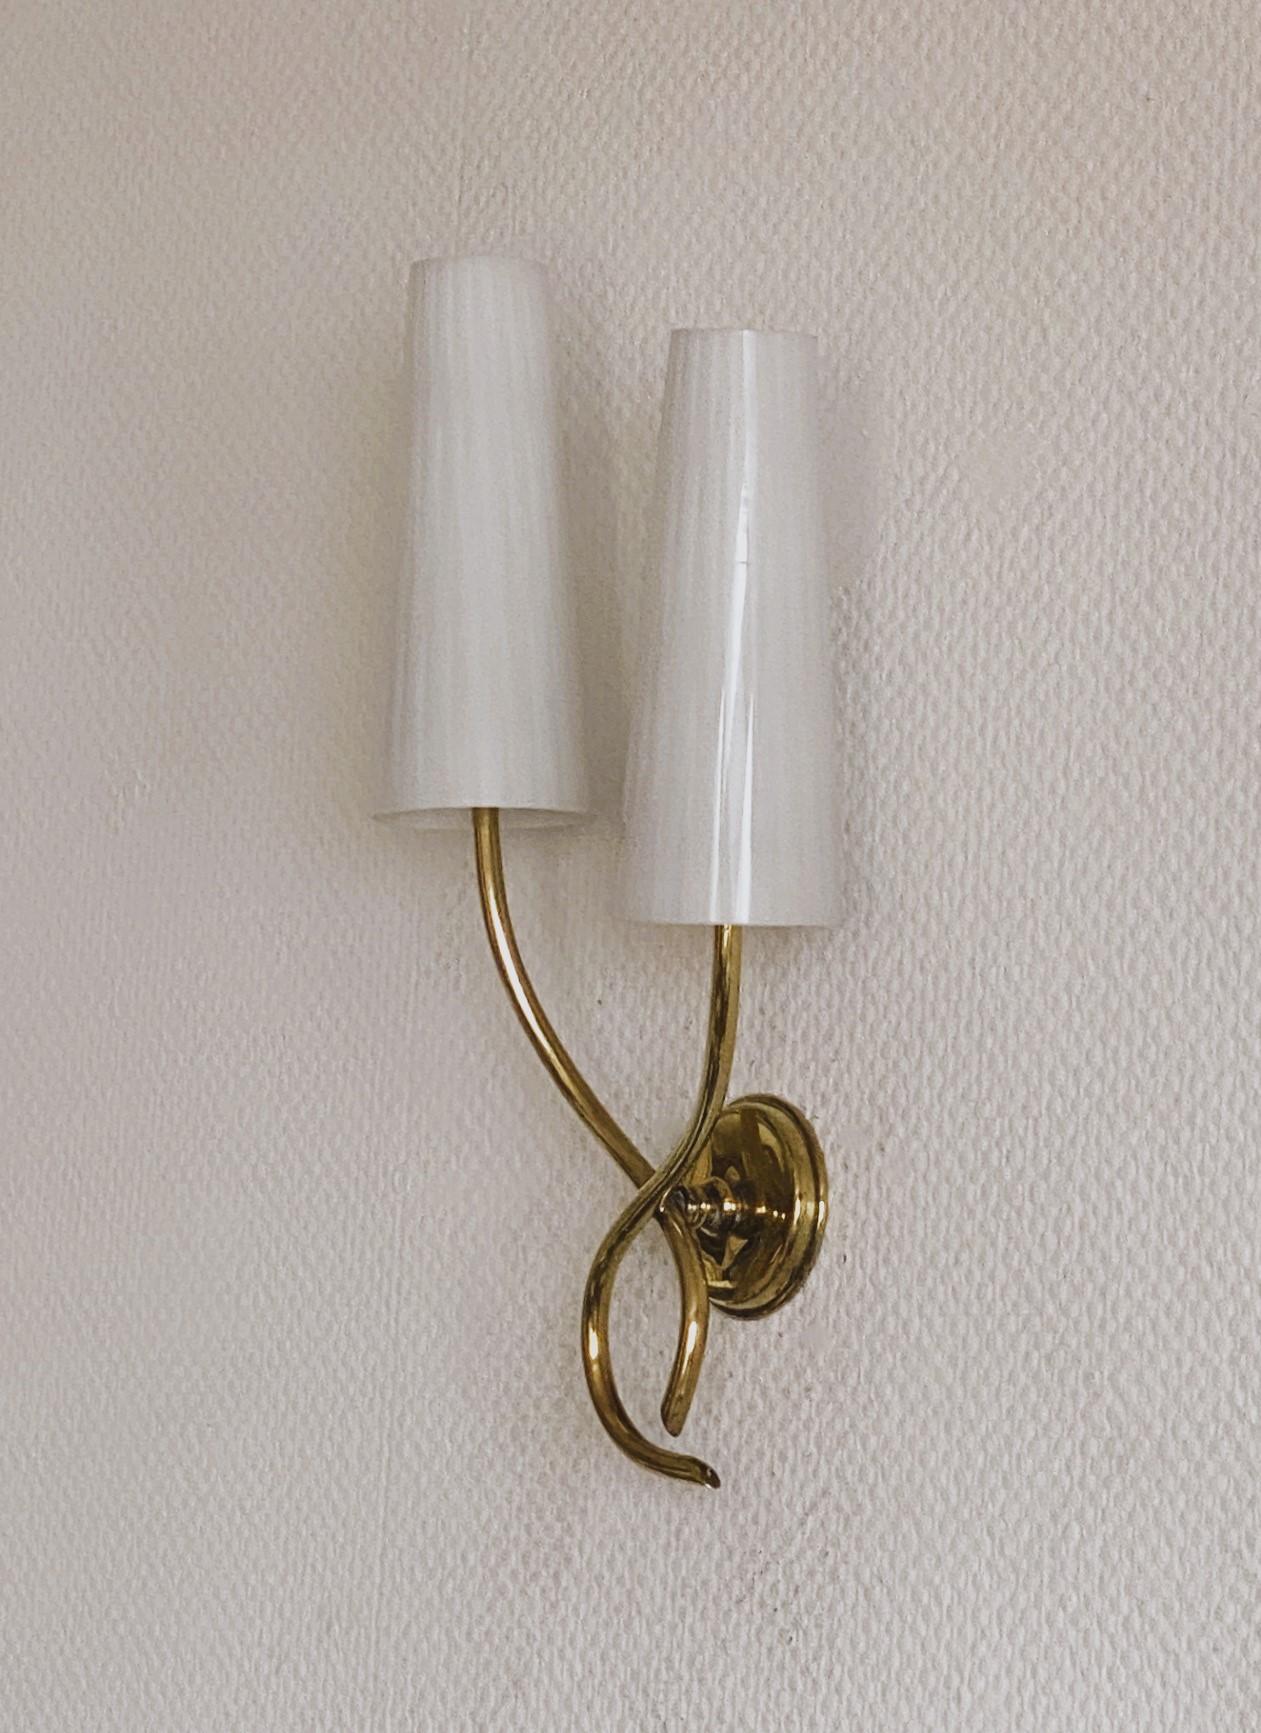 Pair of French Maison Lunel Brass Opal Glass Two-Light Wall Sconces, 1950s For Sale 1